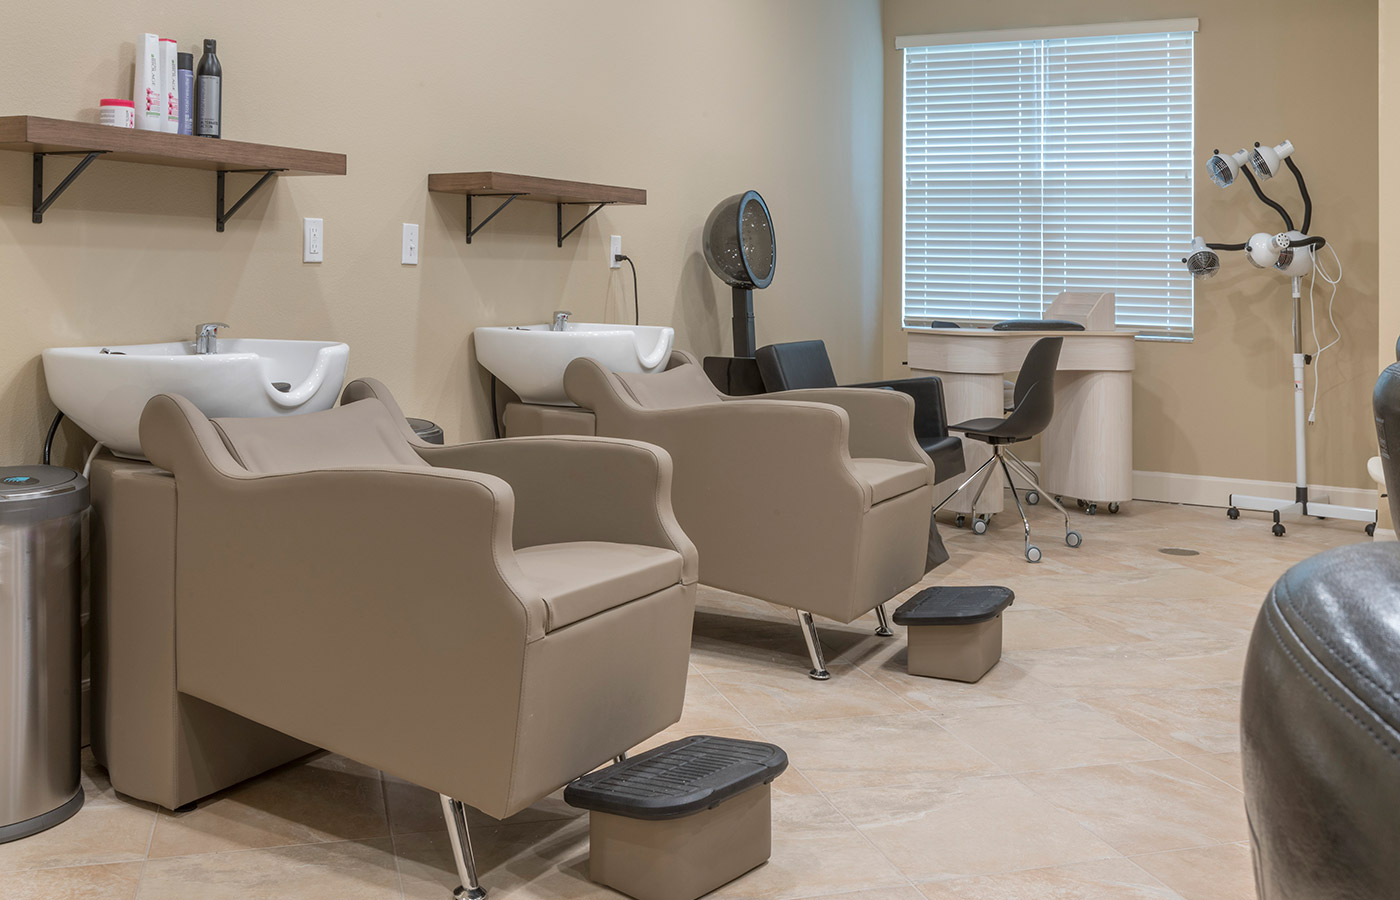 Salon with seating stations.